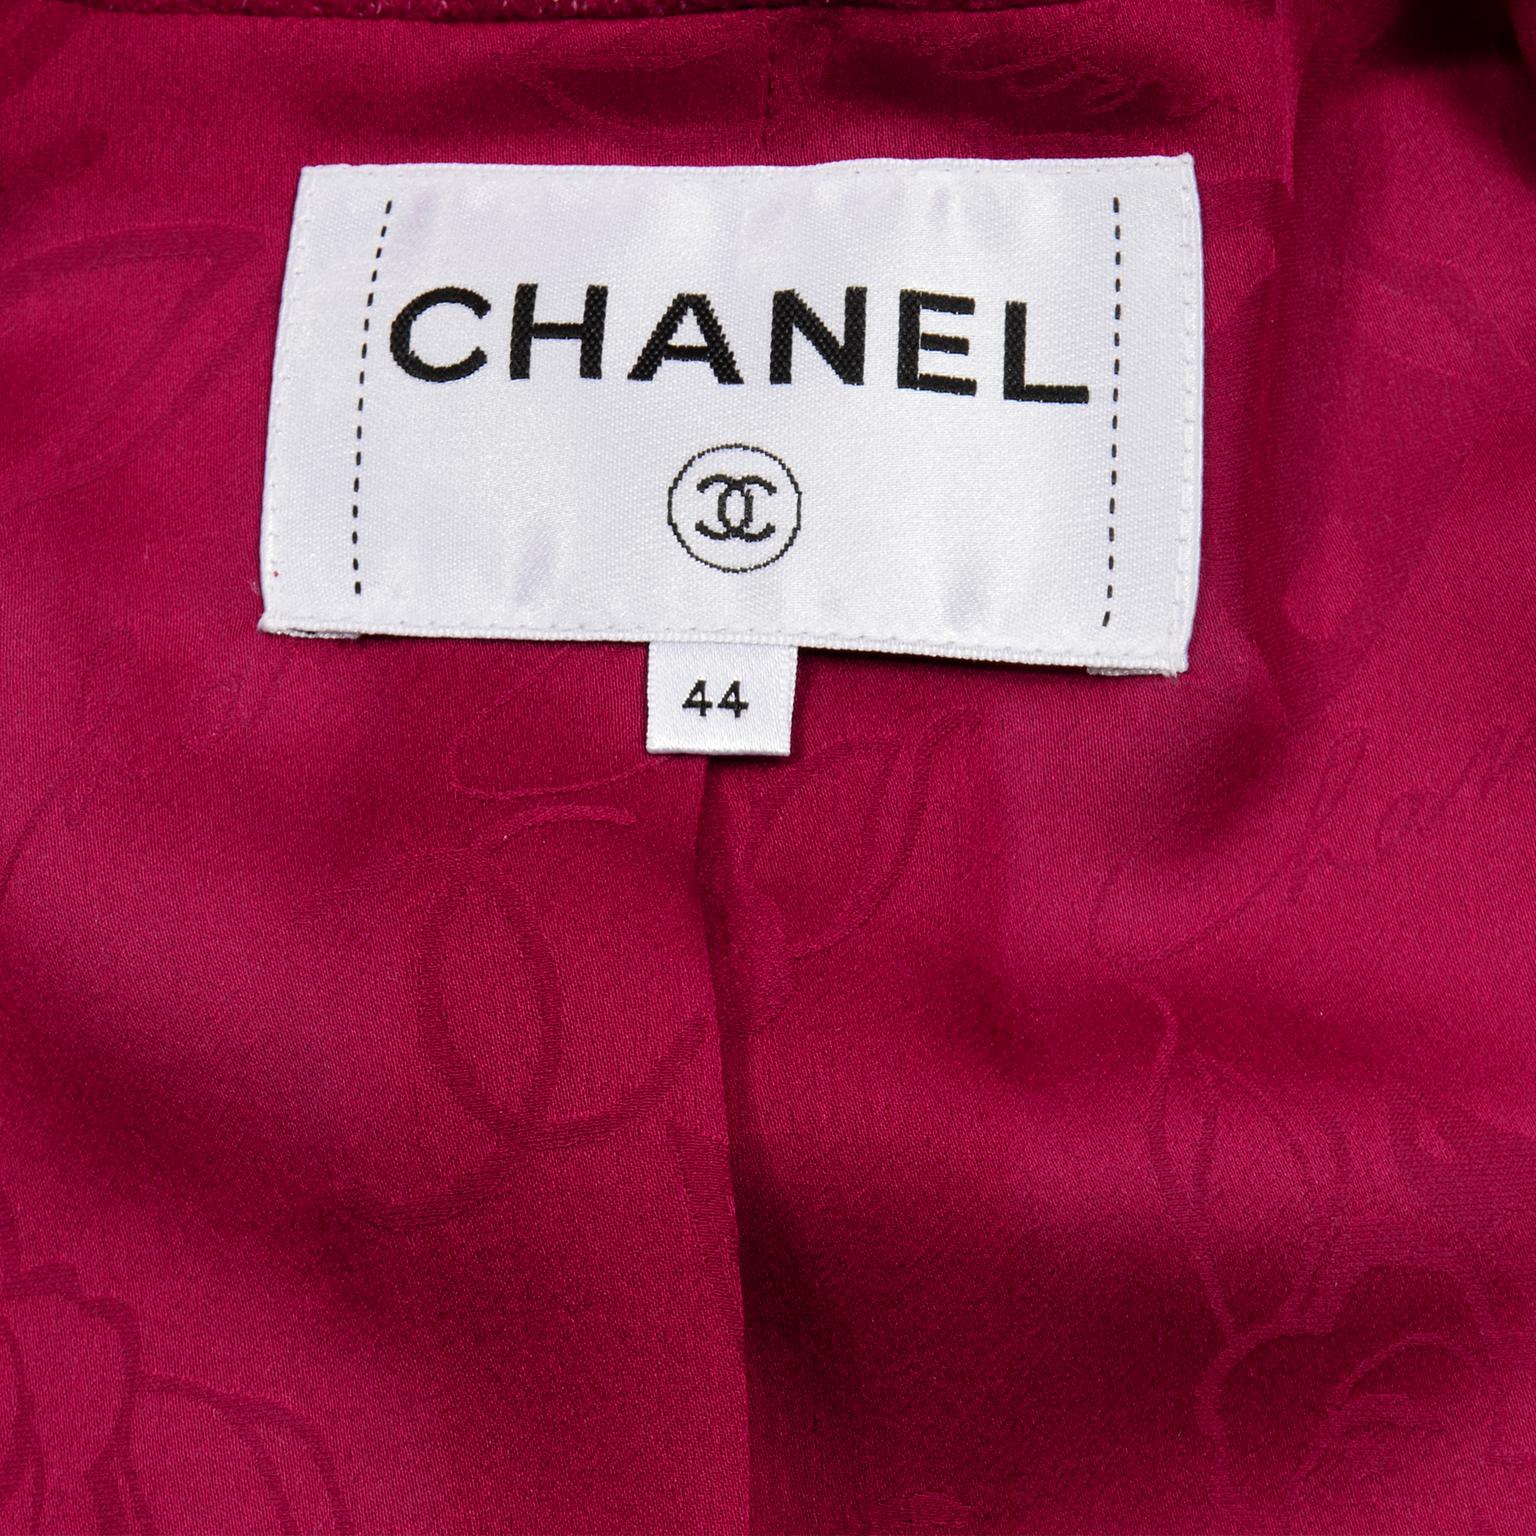 Chanel New With Tags 2018 Raspberry Pink Wool Blend Jacket Deadstock 7